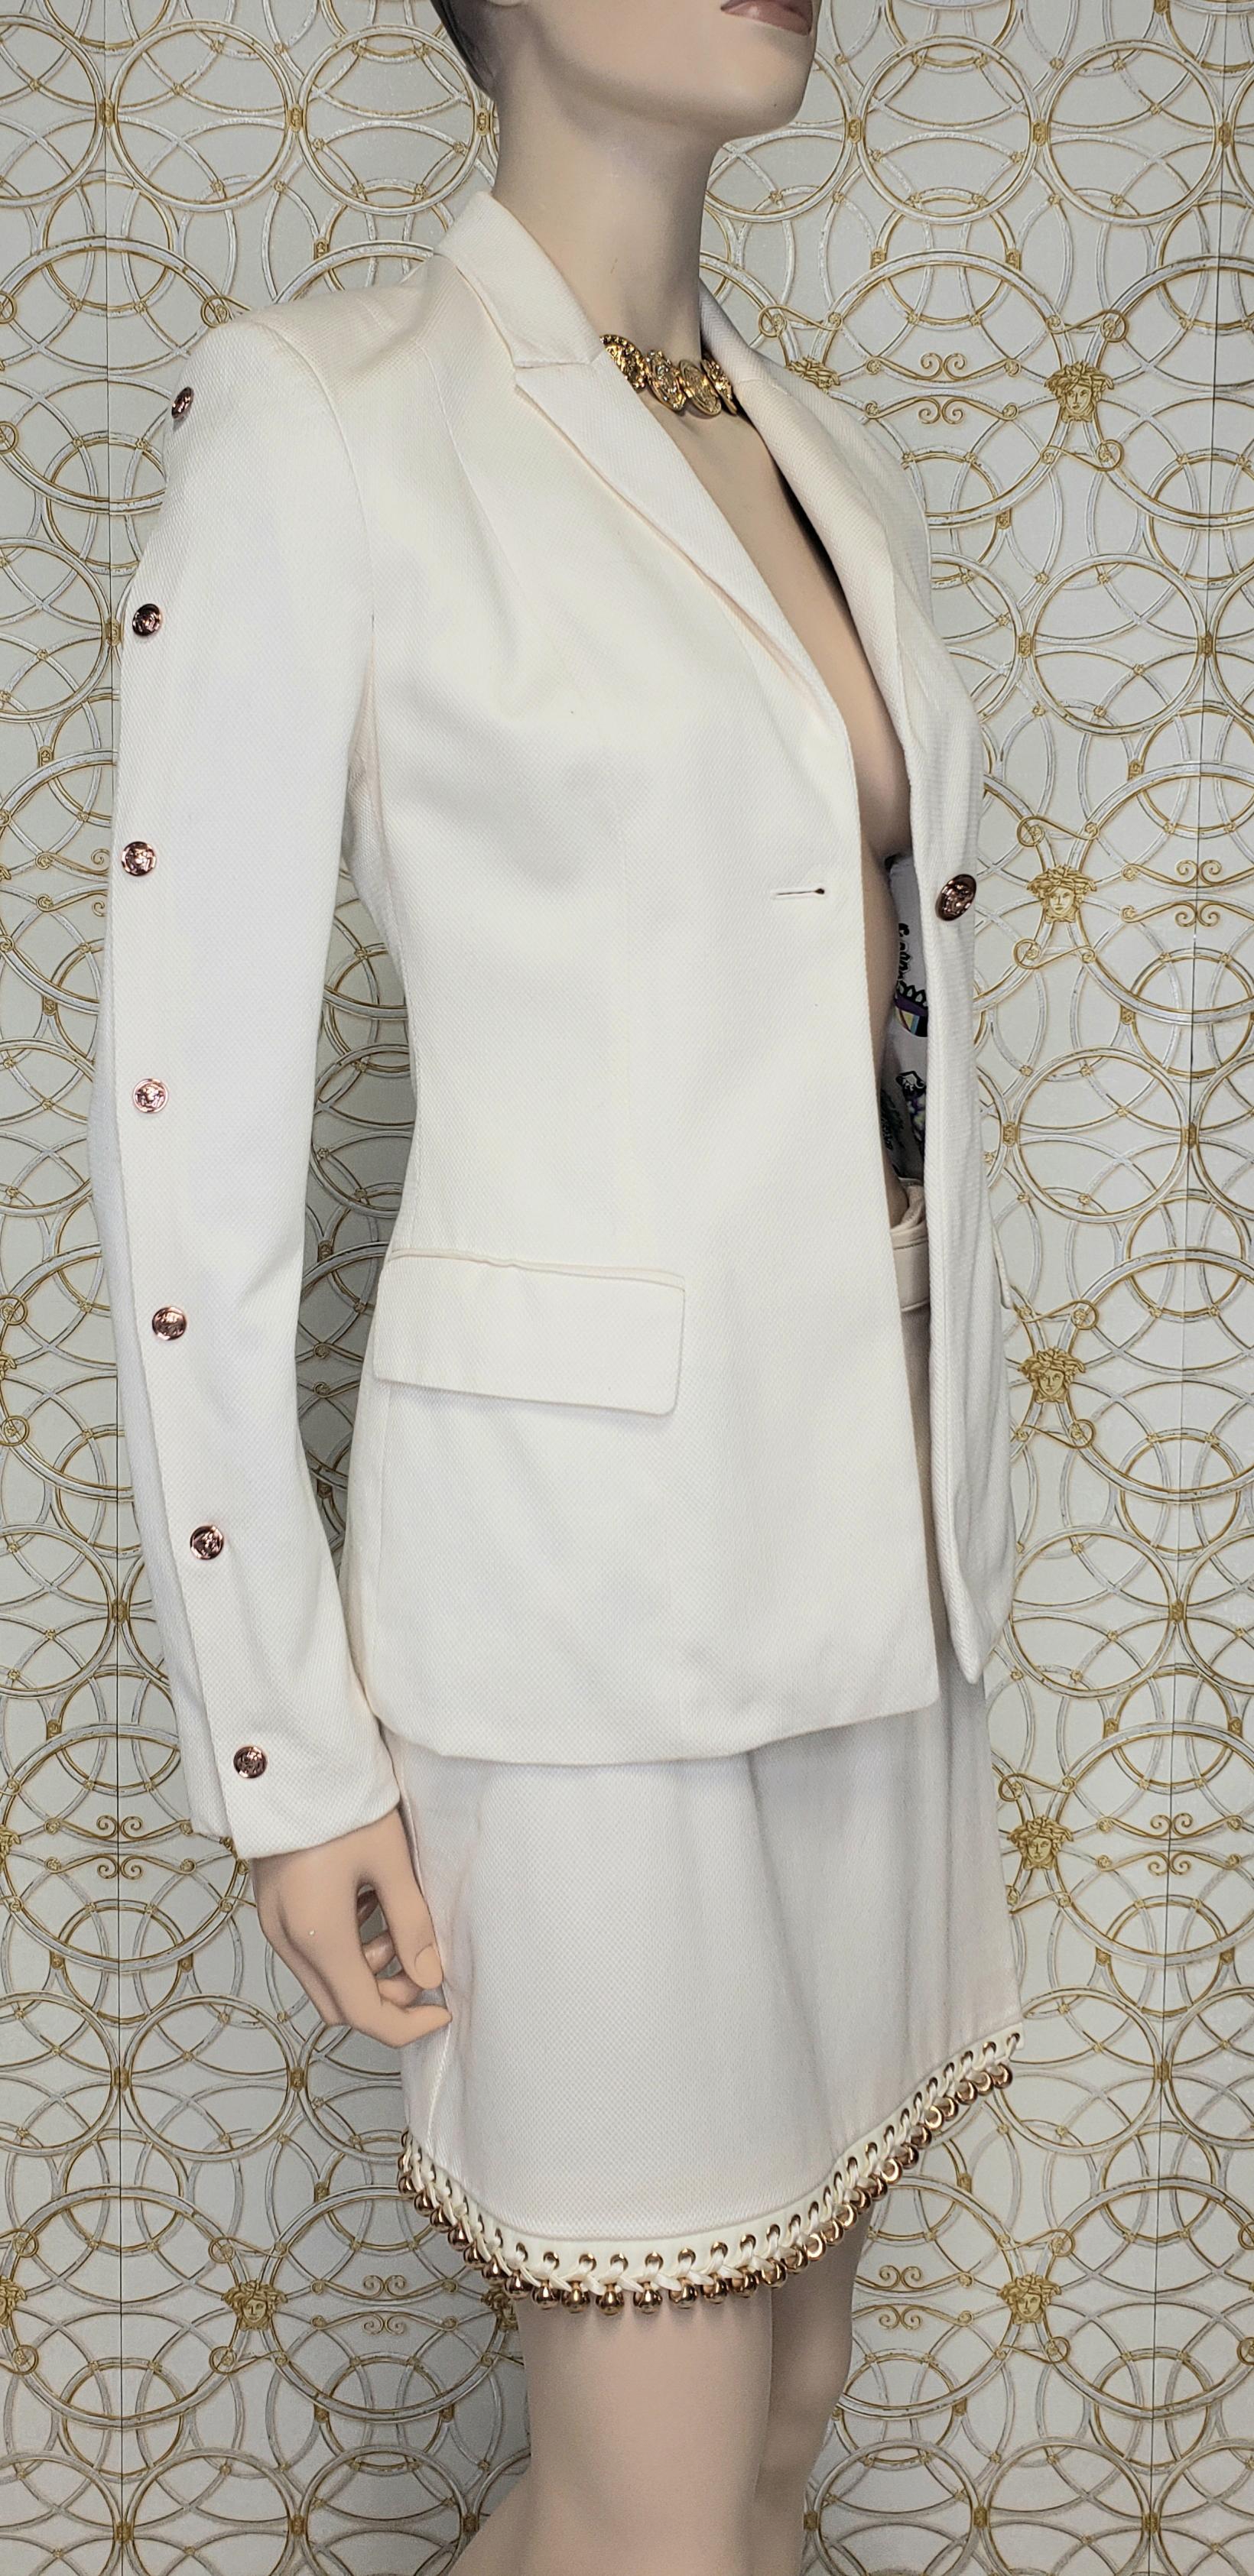 Resort 2013 look #1 NEW VERSACE OFF WHITE COTTON SKIRT SUIT For Sale 4